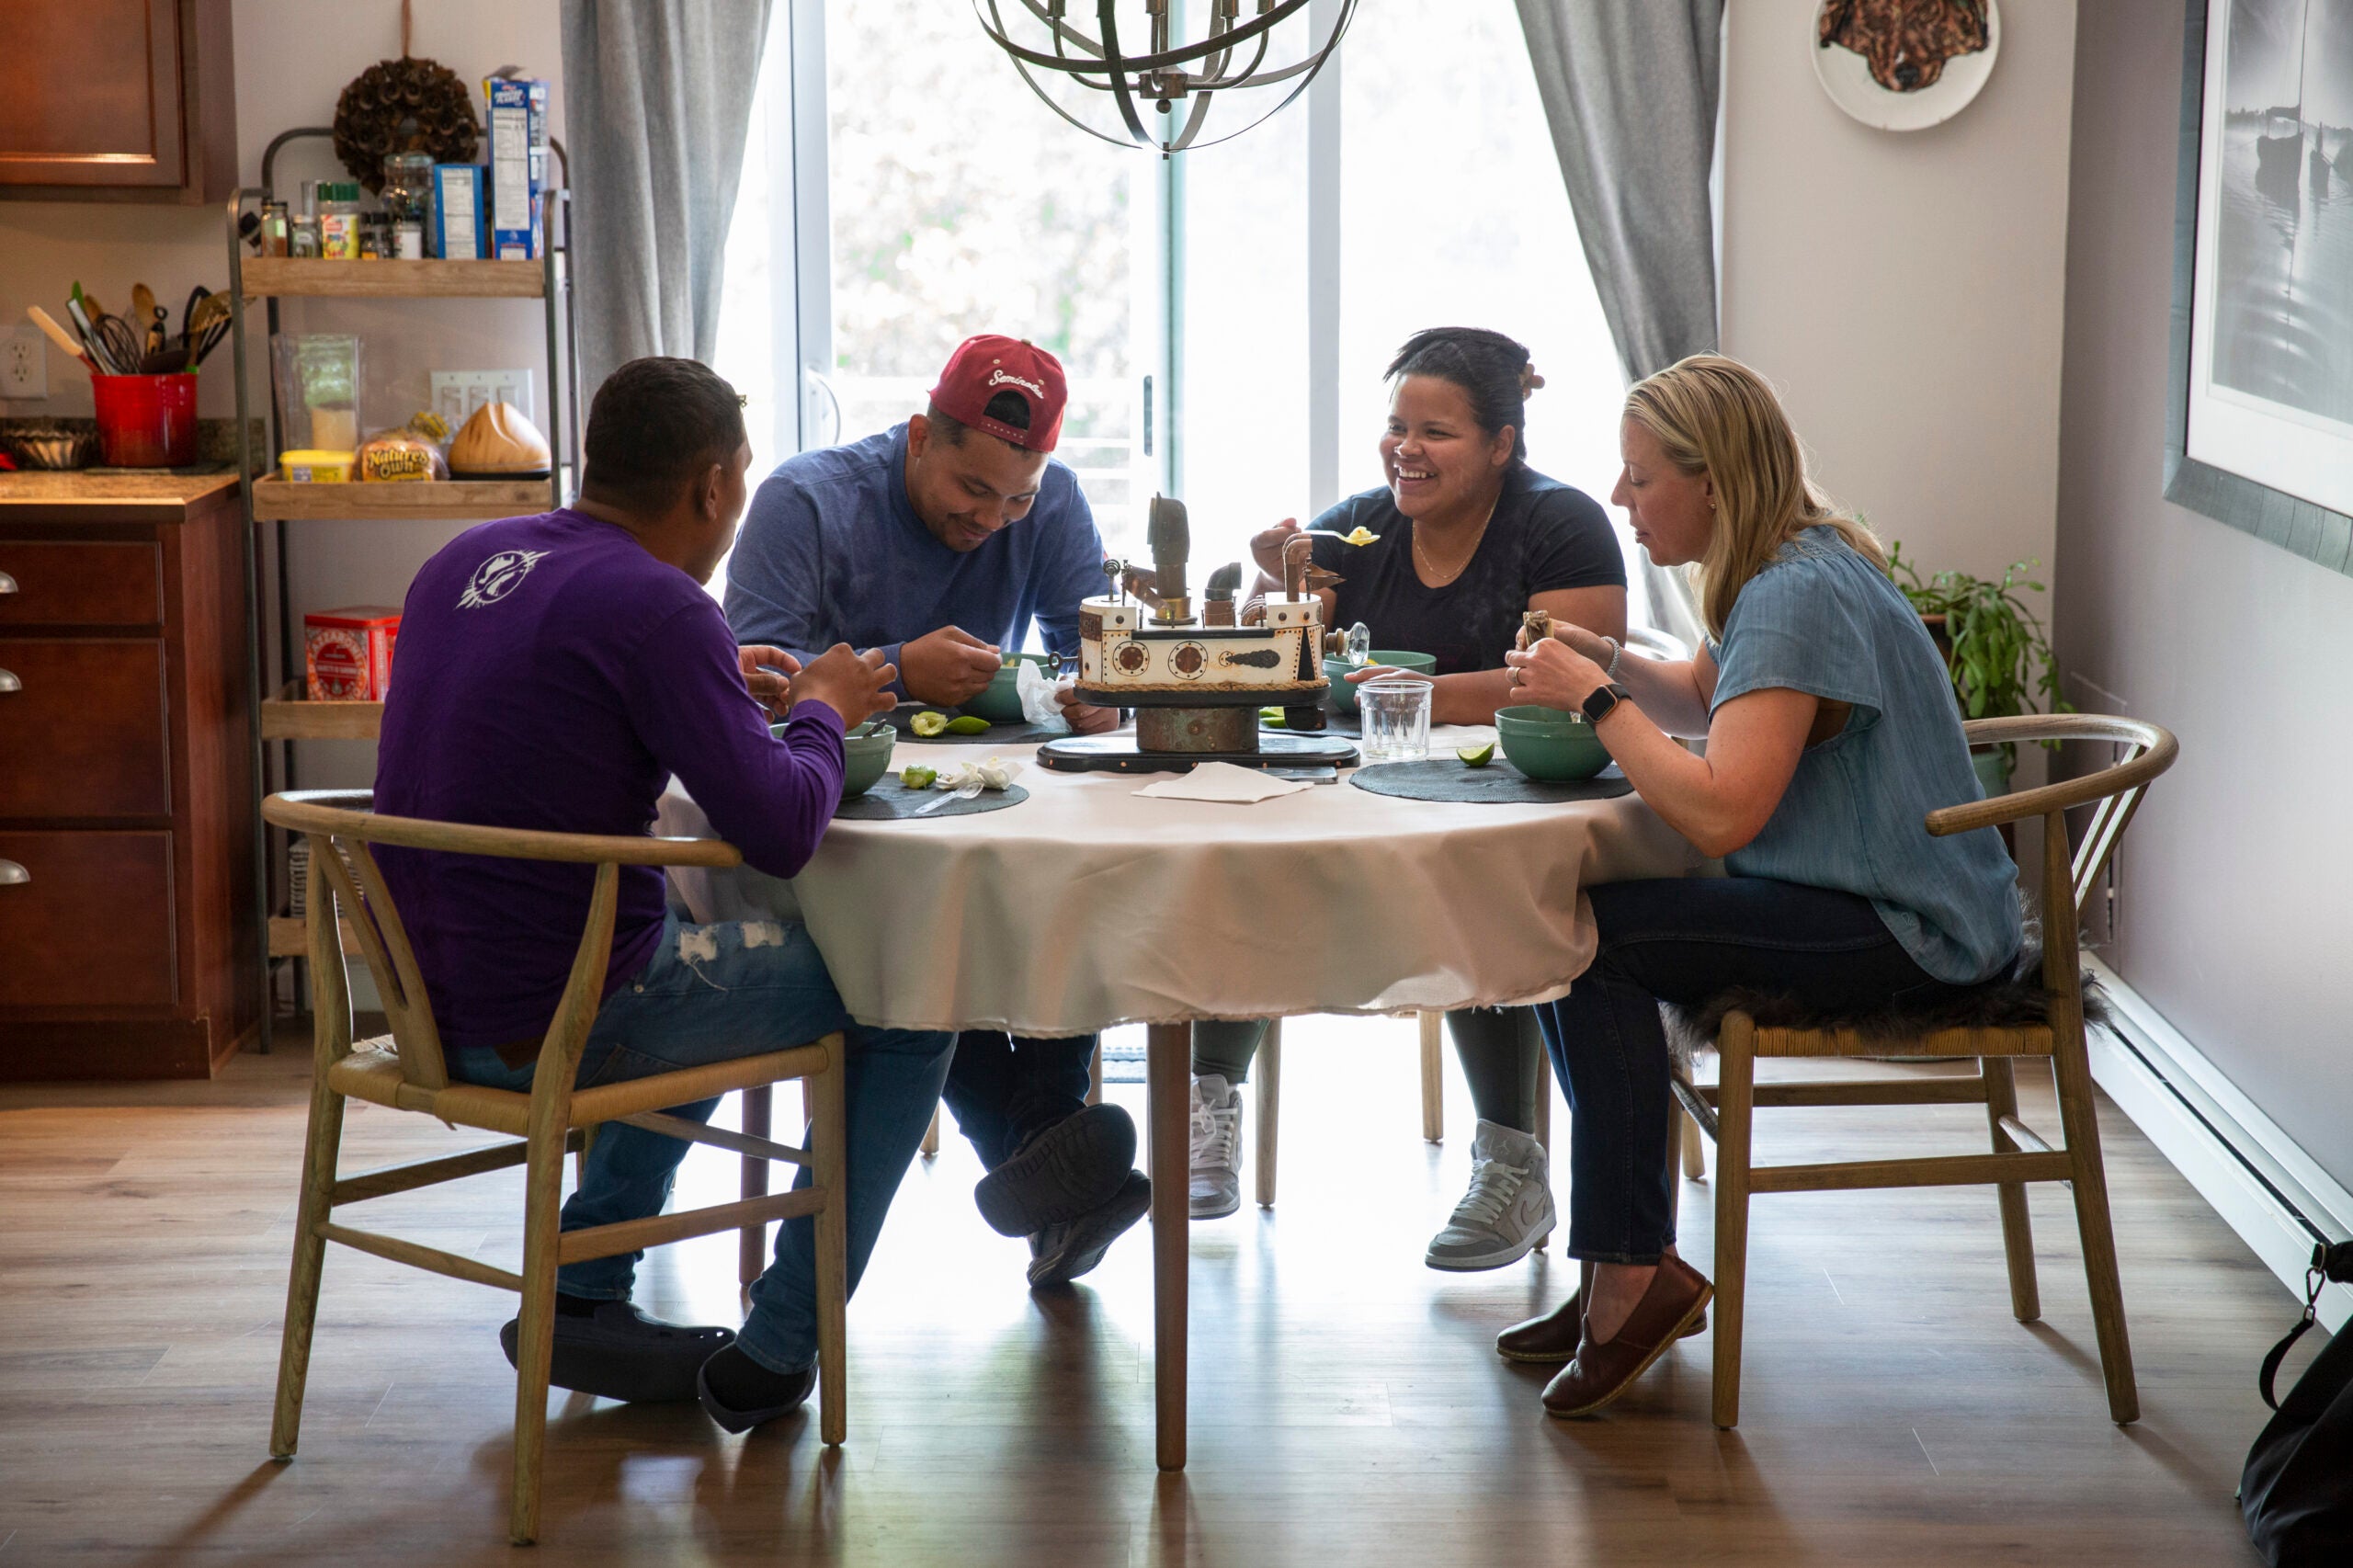 Venezuelan migrants at the home they are renting in Martha’s Vineyard, Mass.